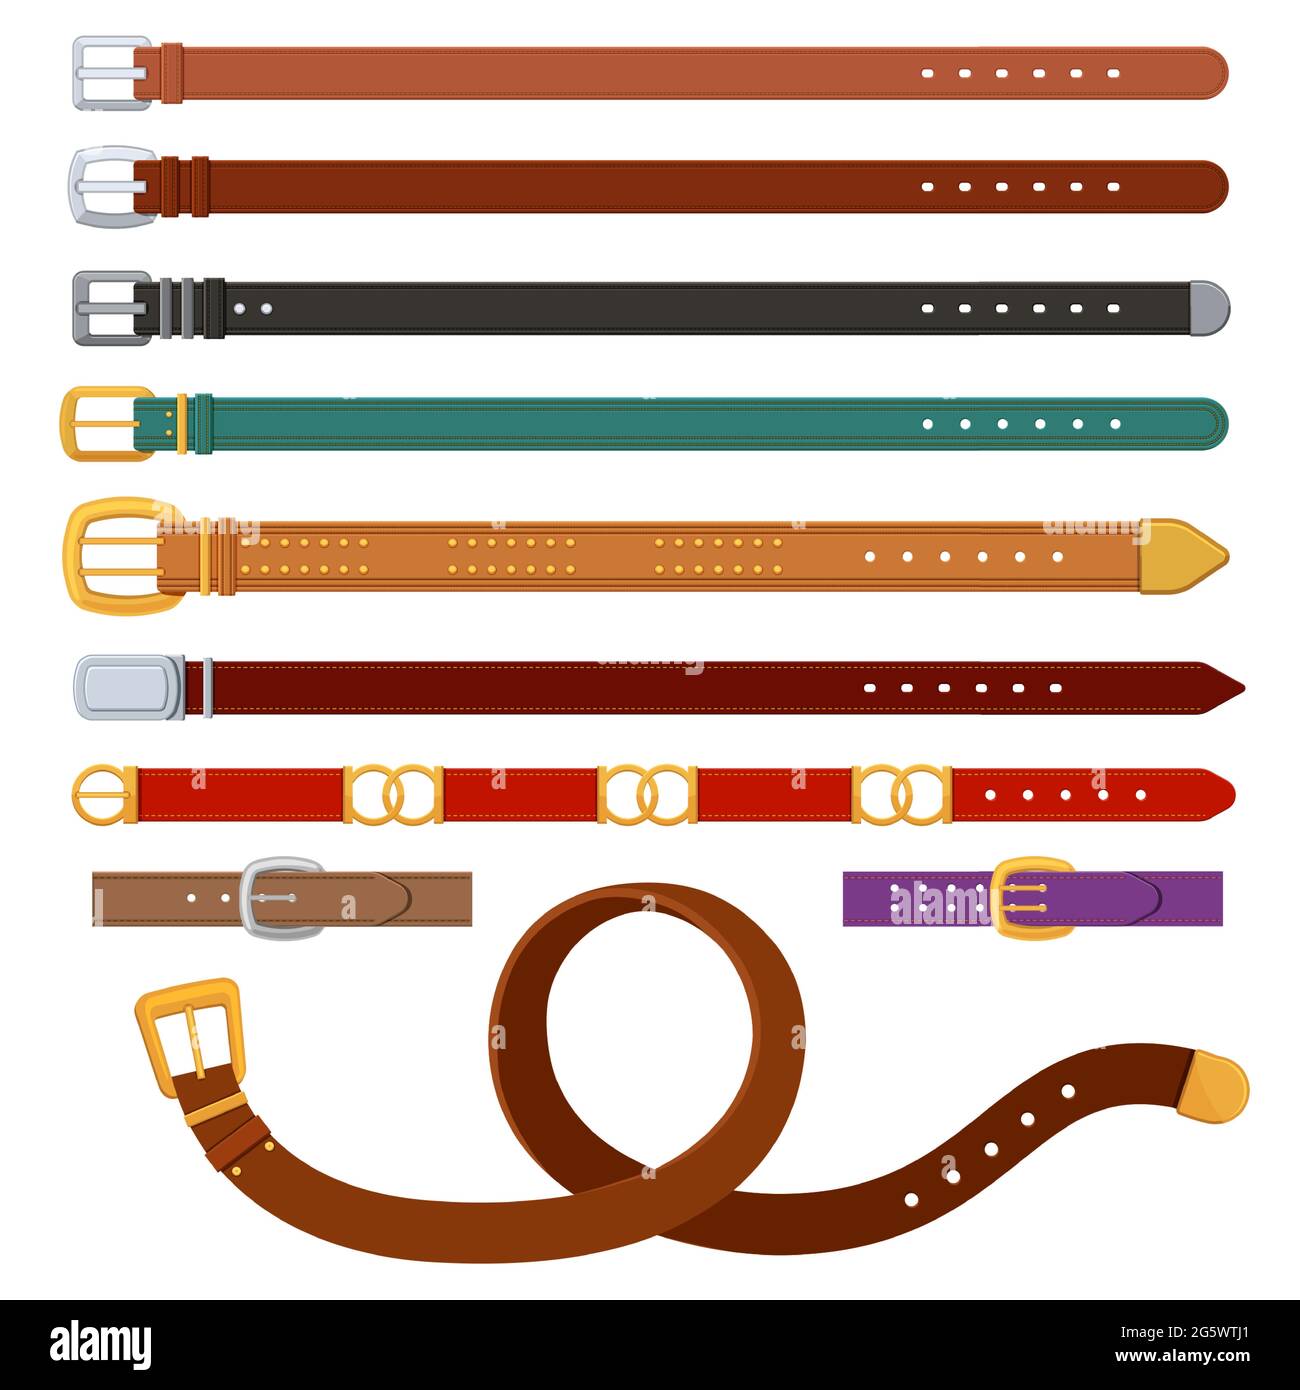 Leather belts. Female and male belt with metal or golden buckles. Fashion clothing accessories for trousers. Brown strap design vector set Stock Vector